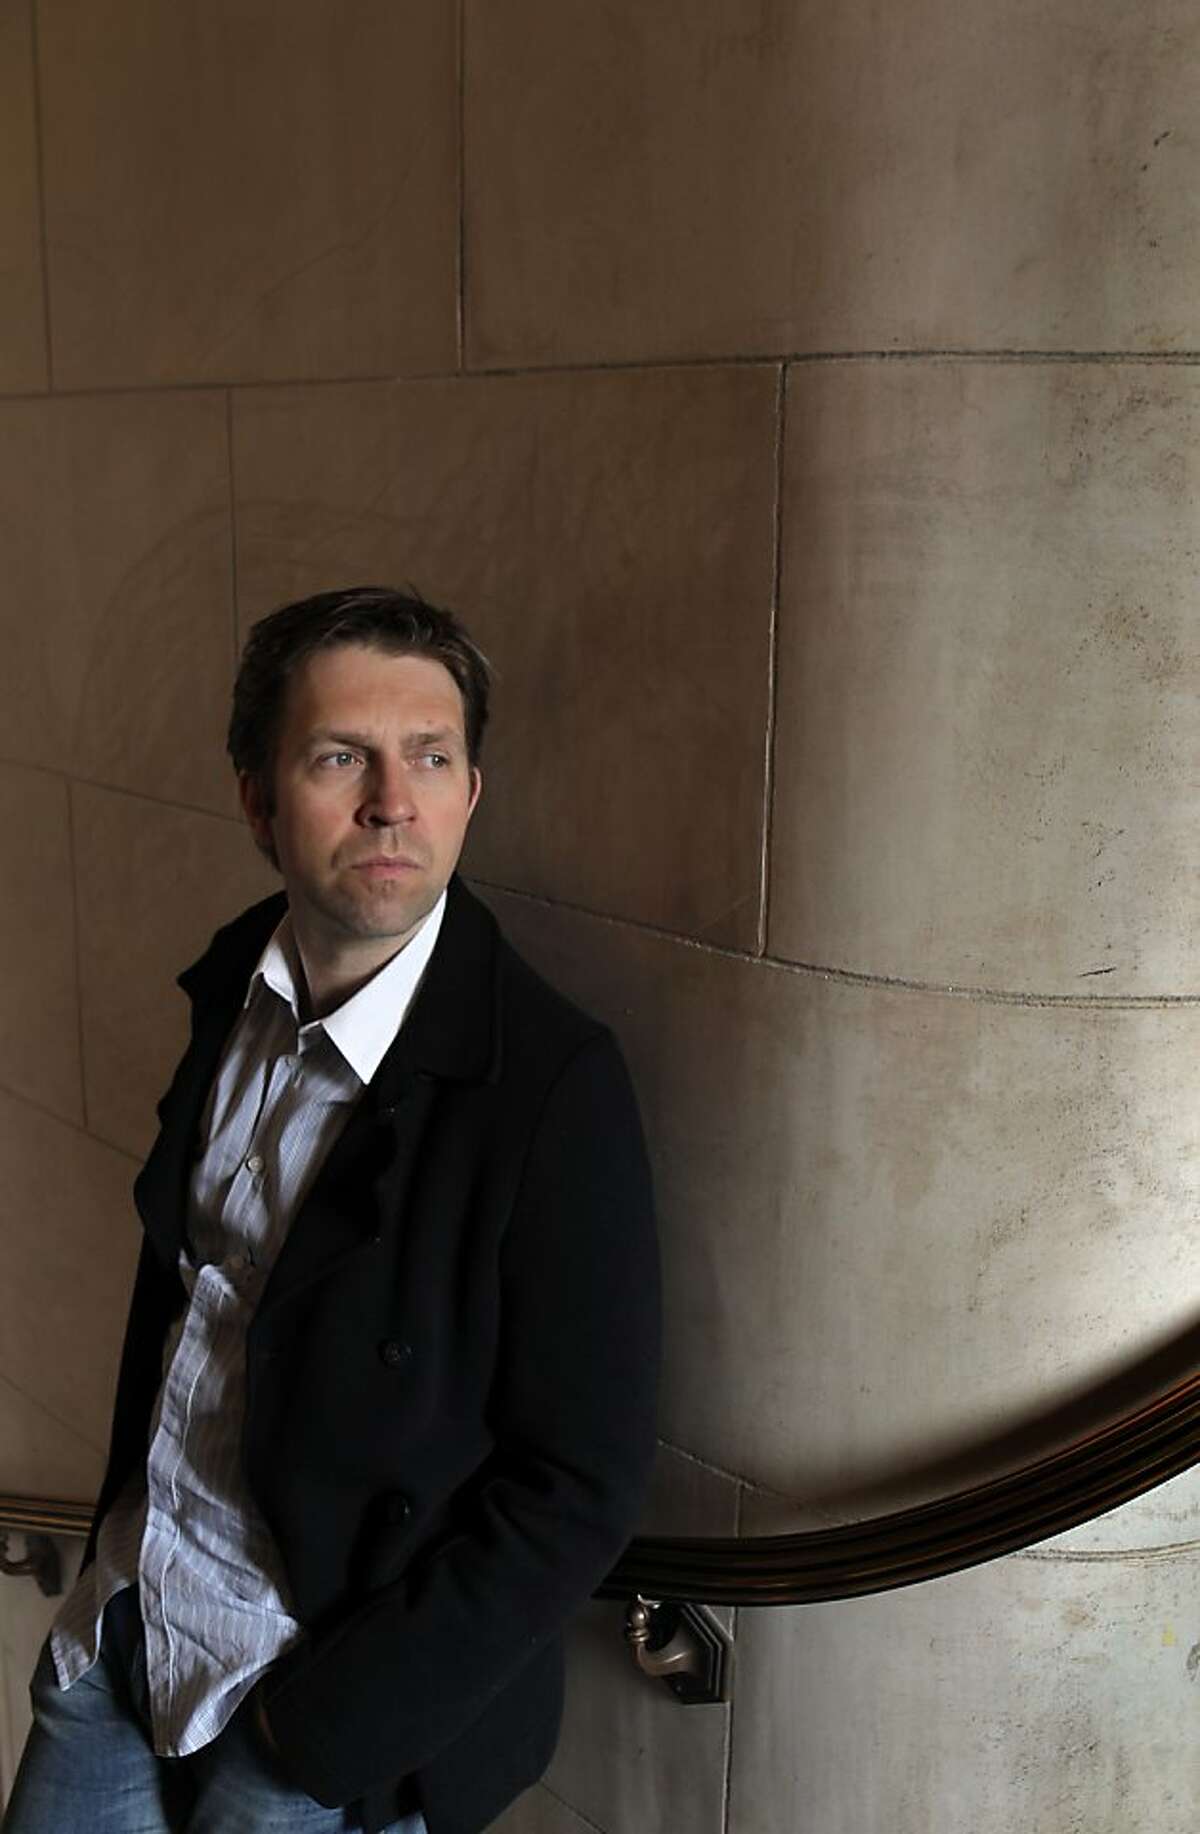 Norwegian pianist Leif Ove Andsnes, who's curating Ojai Music Festival which is coming to Berkeley in June. He is shown here at the War Memorial Opera House in San Francisco, Calif., on Sunday, April 22, 2012.